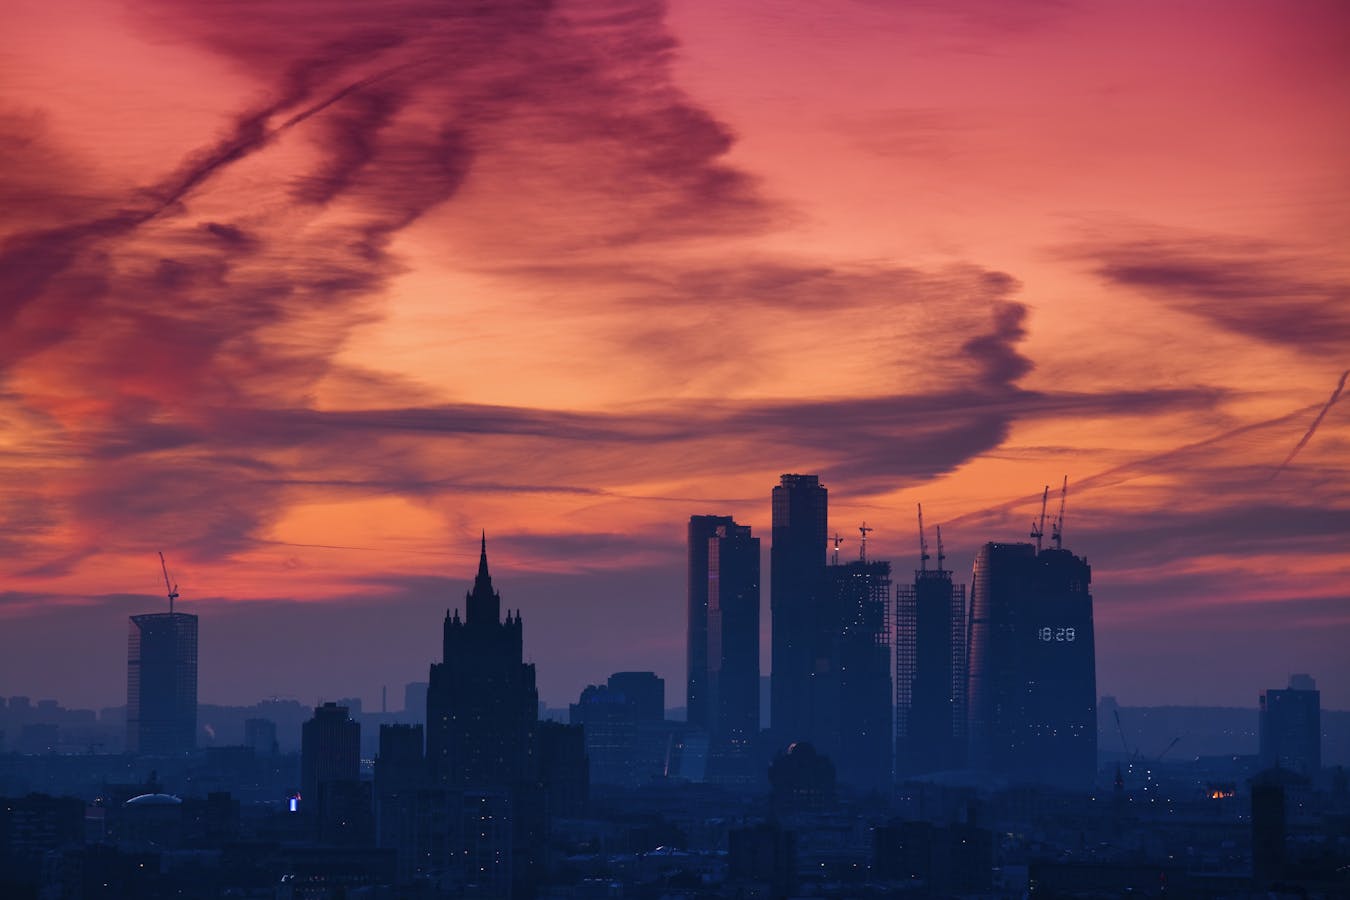 Moscow skyline at sunset